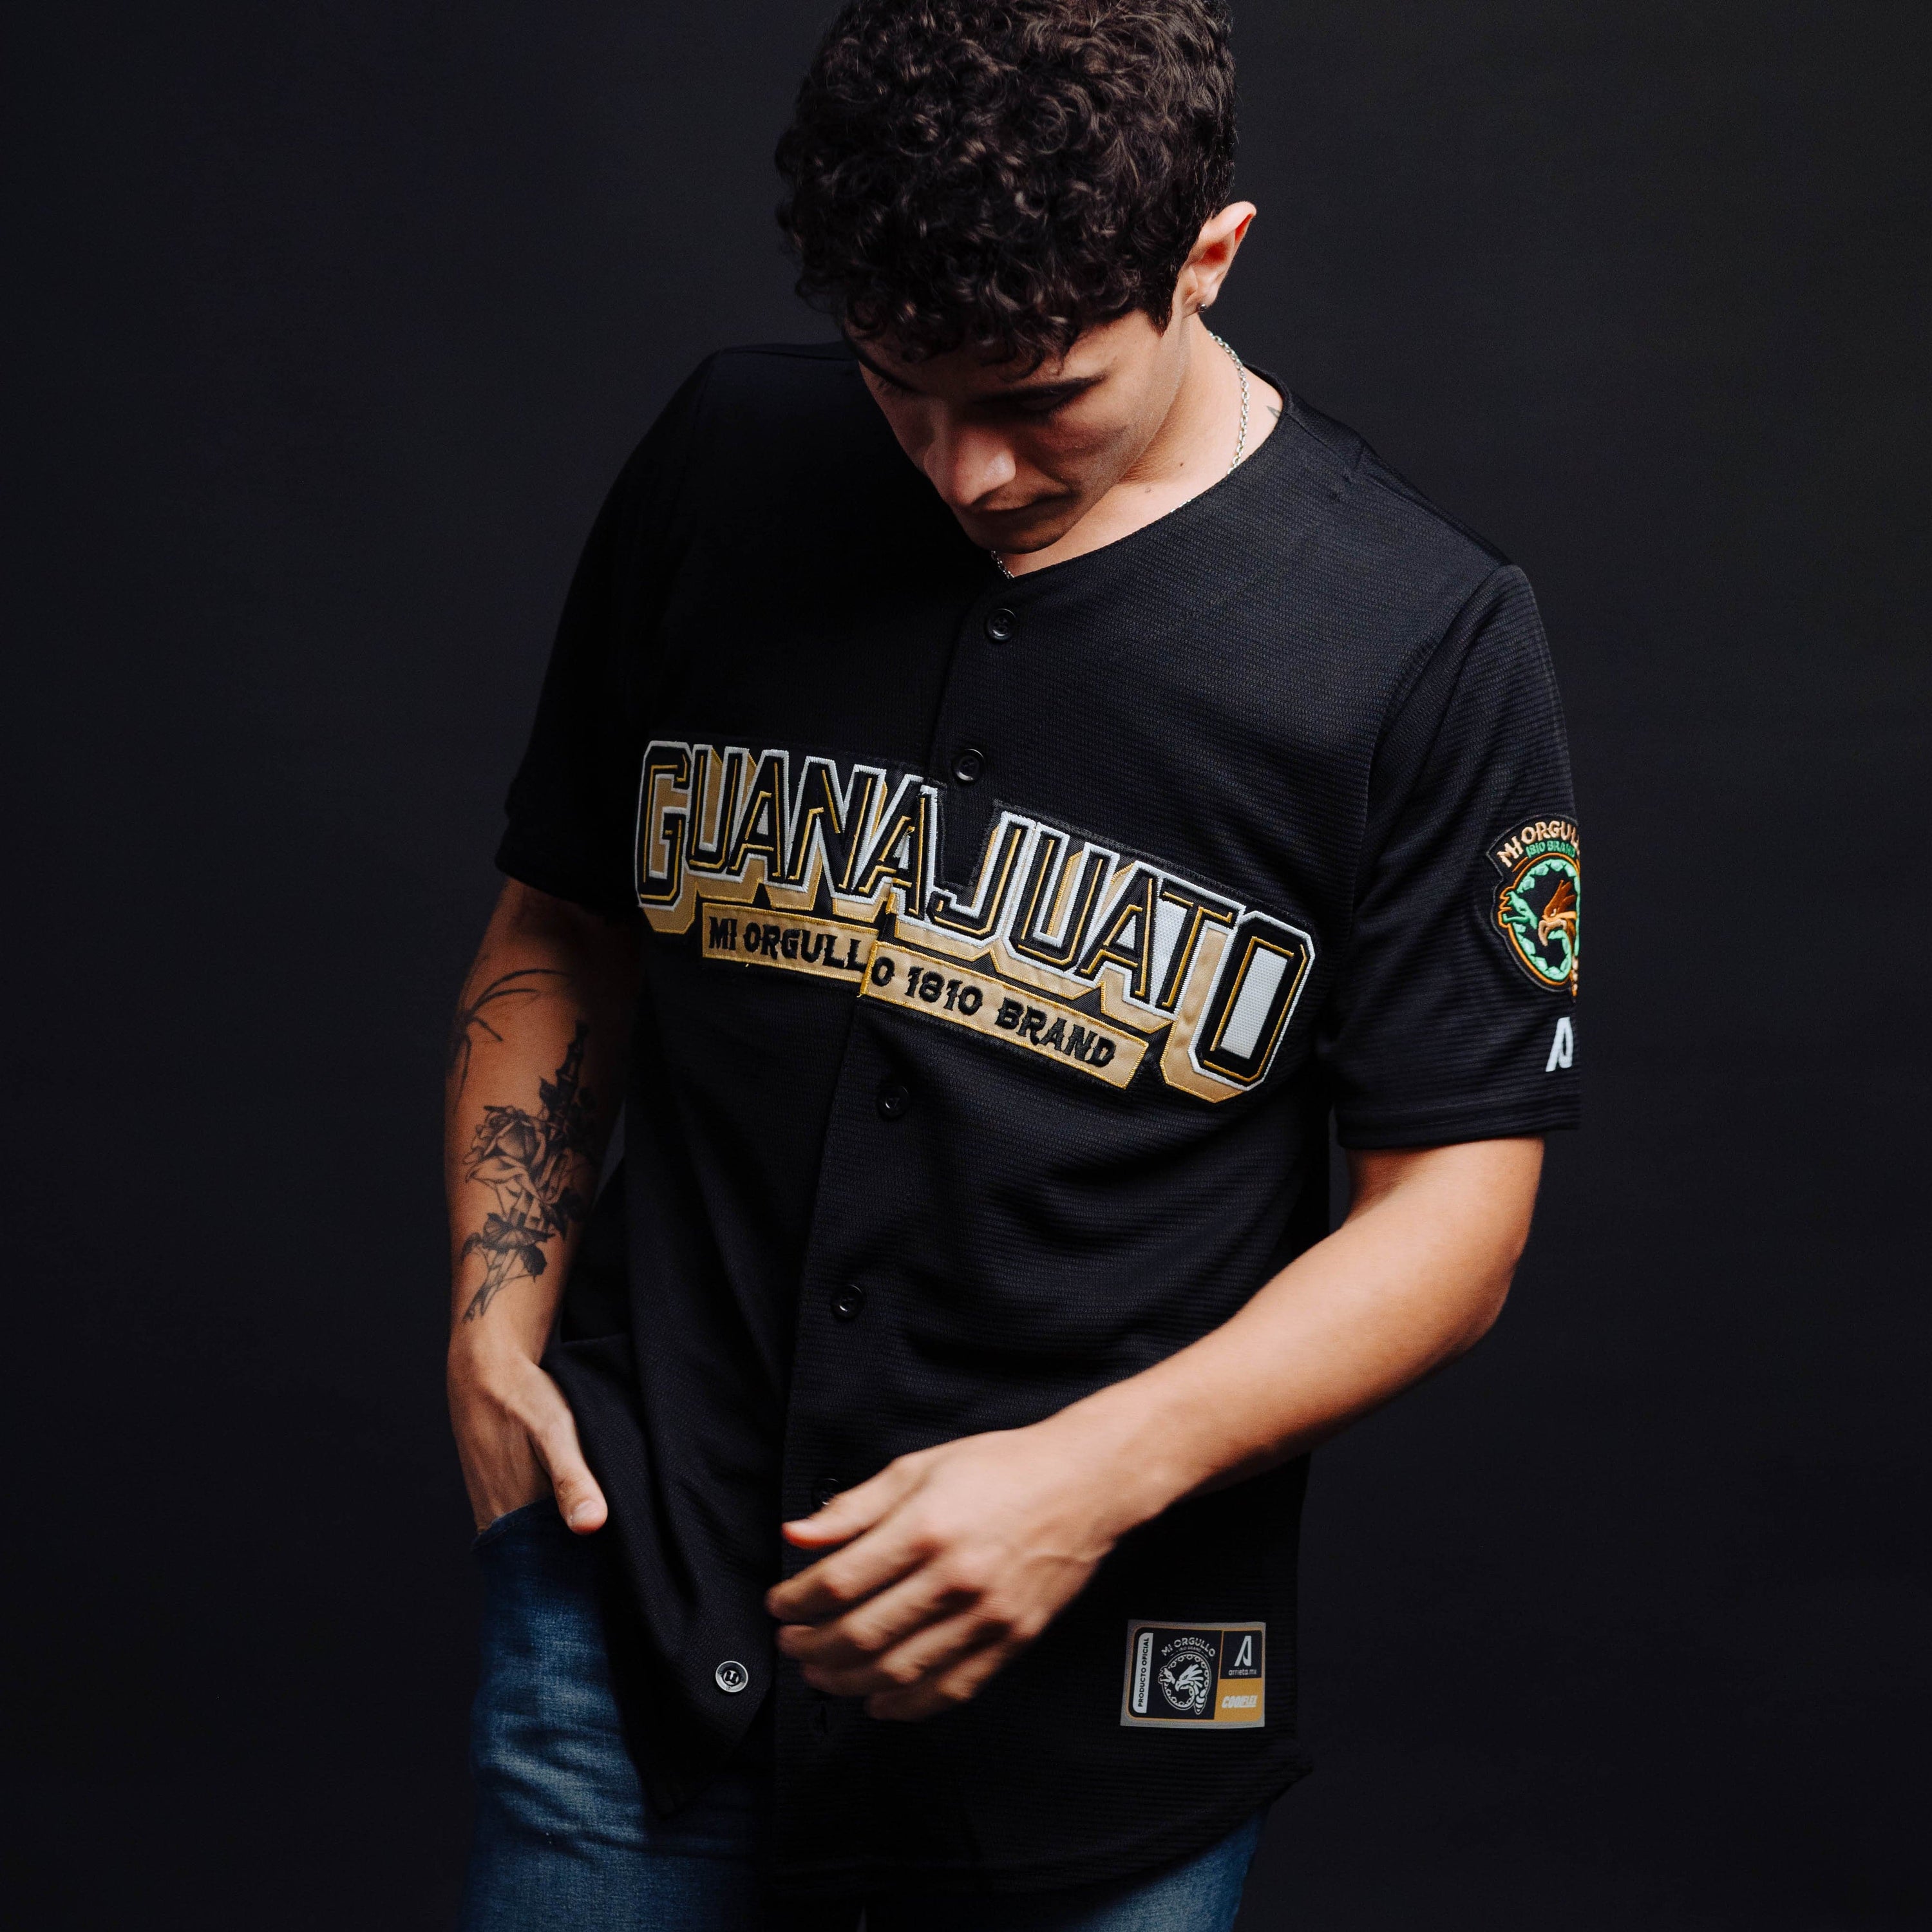 GUANAJUATO BLK/OLD GOLD JERSEY